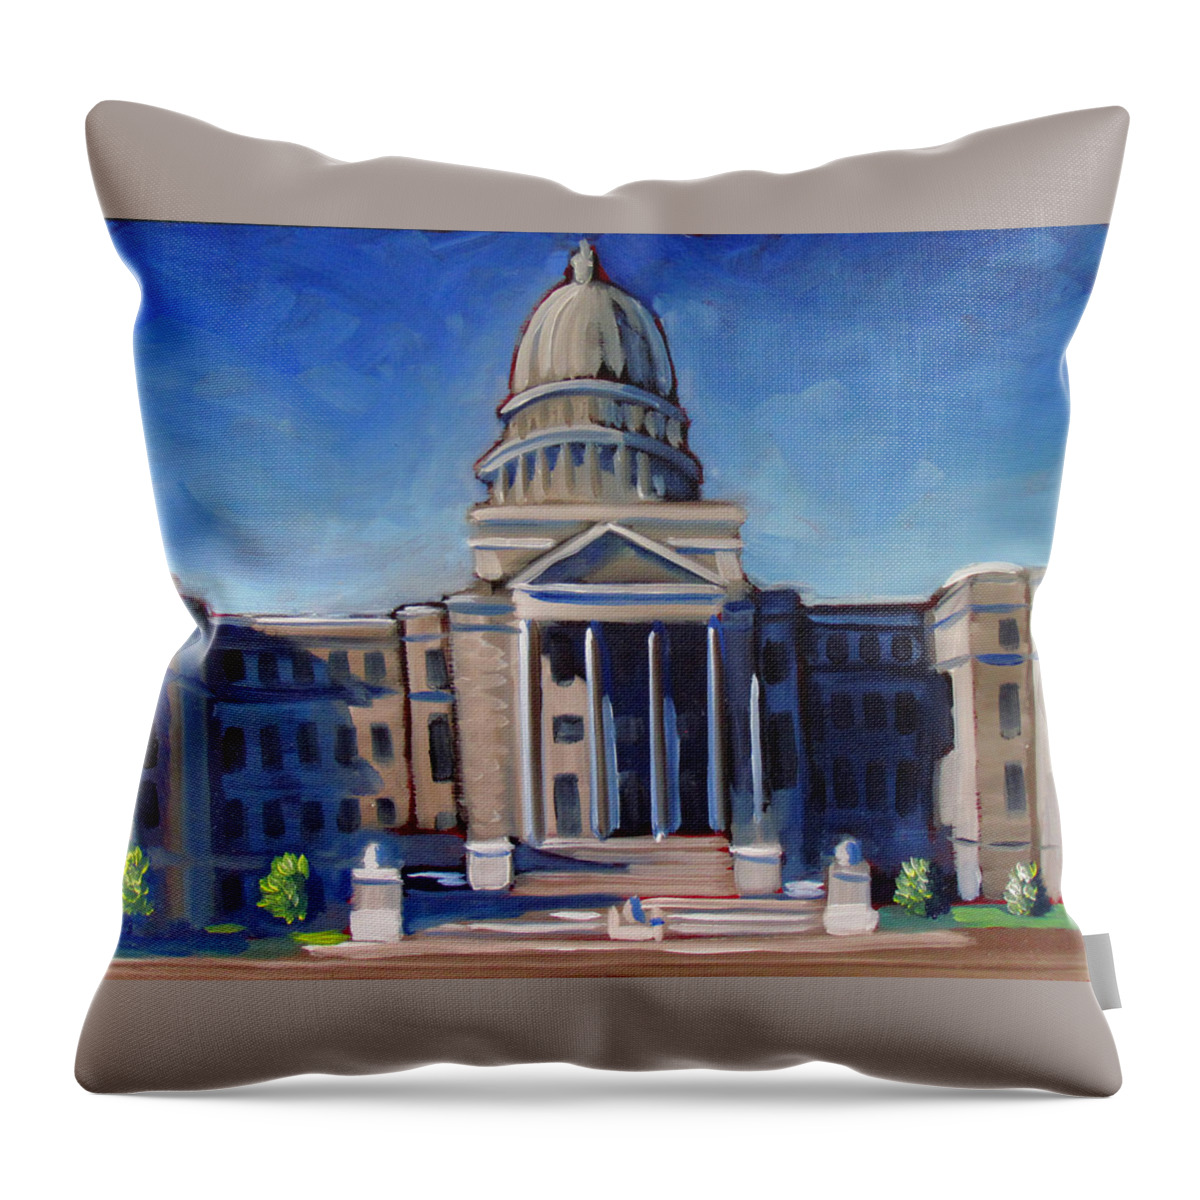 Idaho Throw Pillow featuring the painting Boise Capitol Building 02 by Kevin Hughes